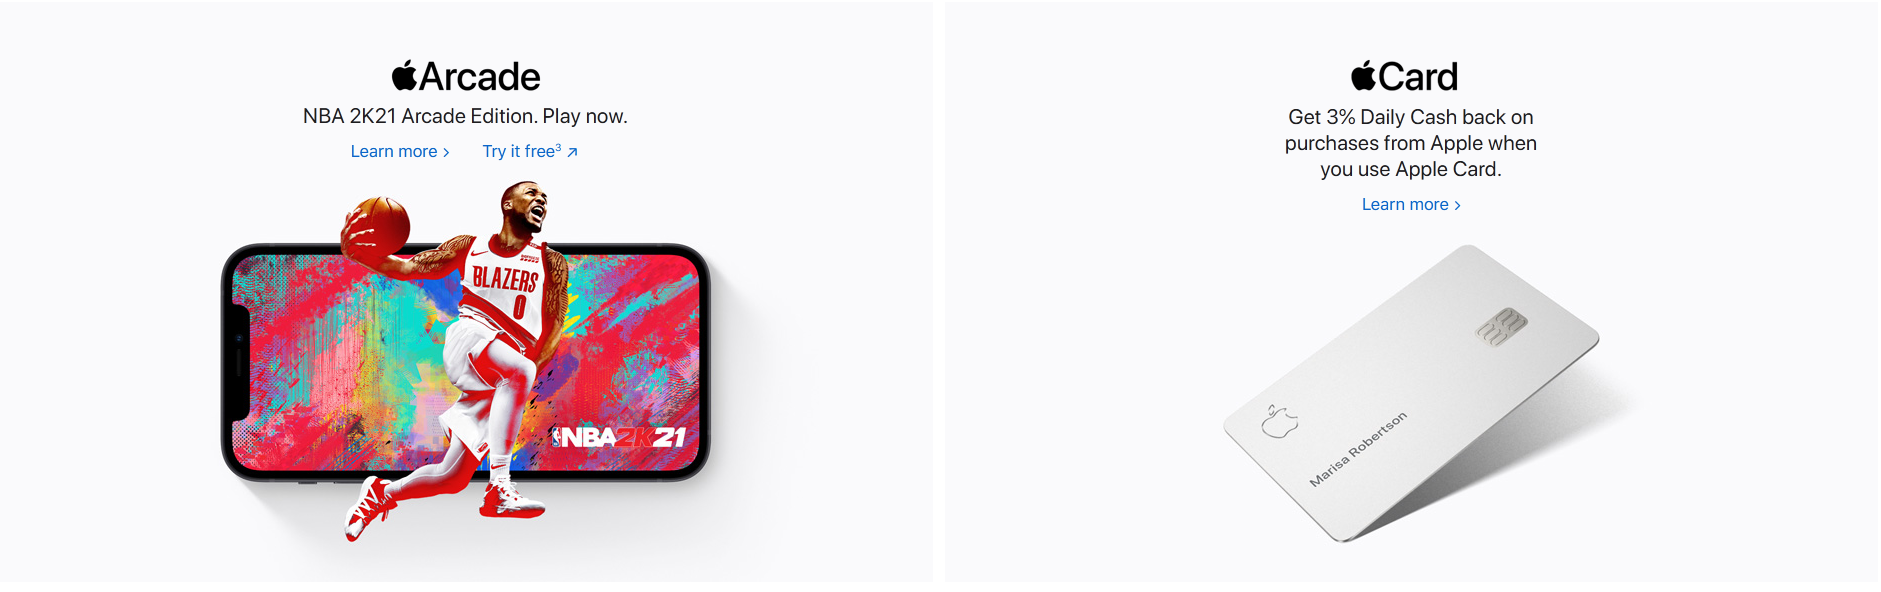 apple official website displaying apple arcade and apple card